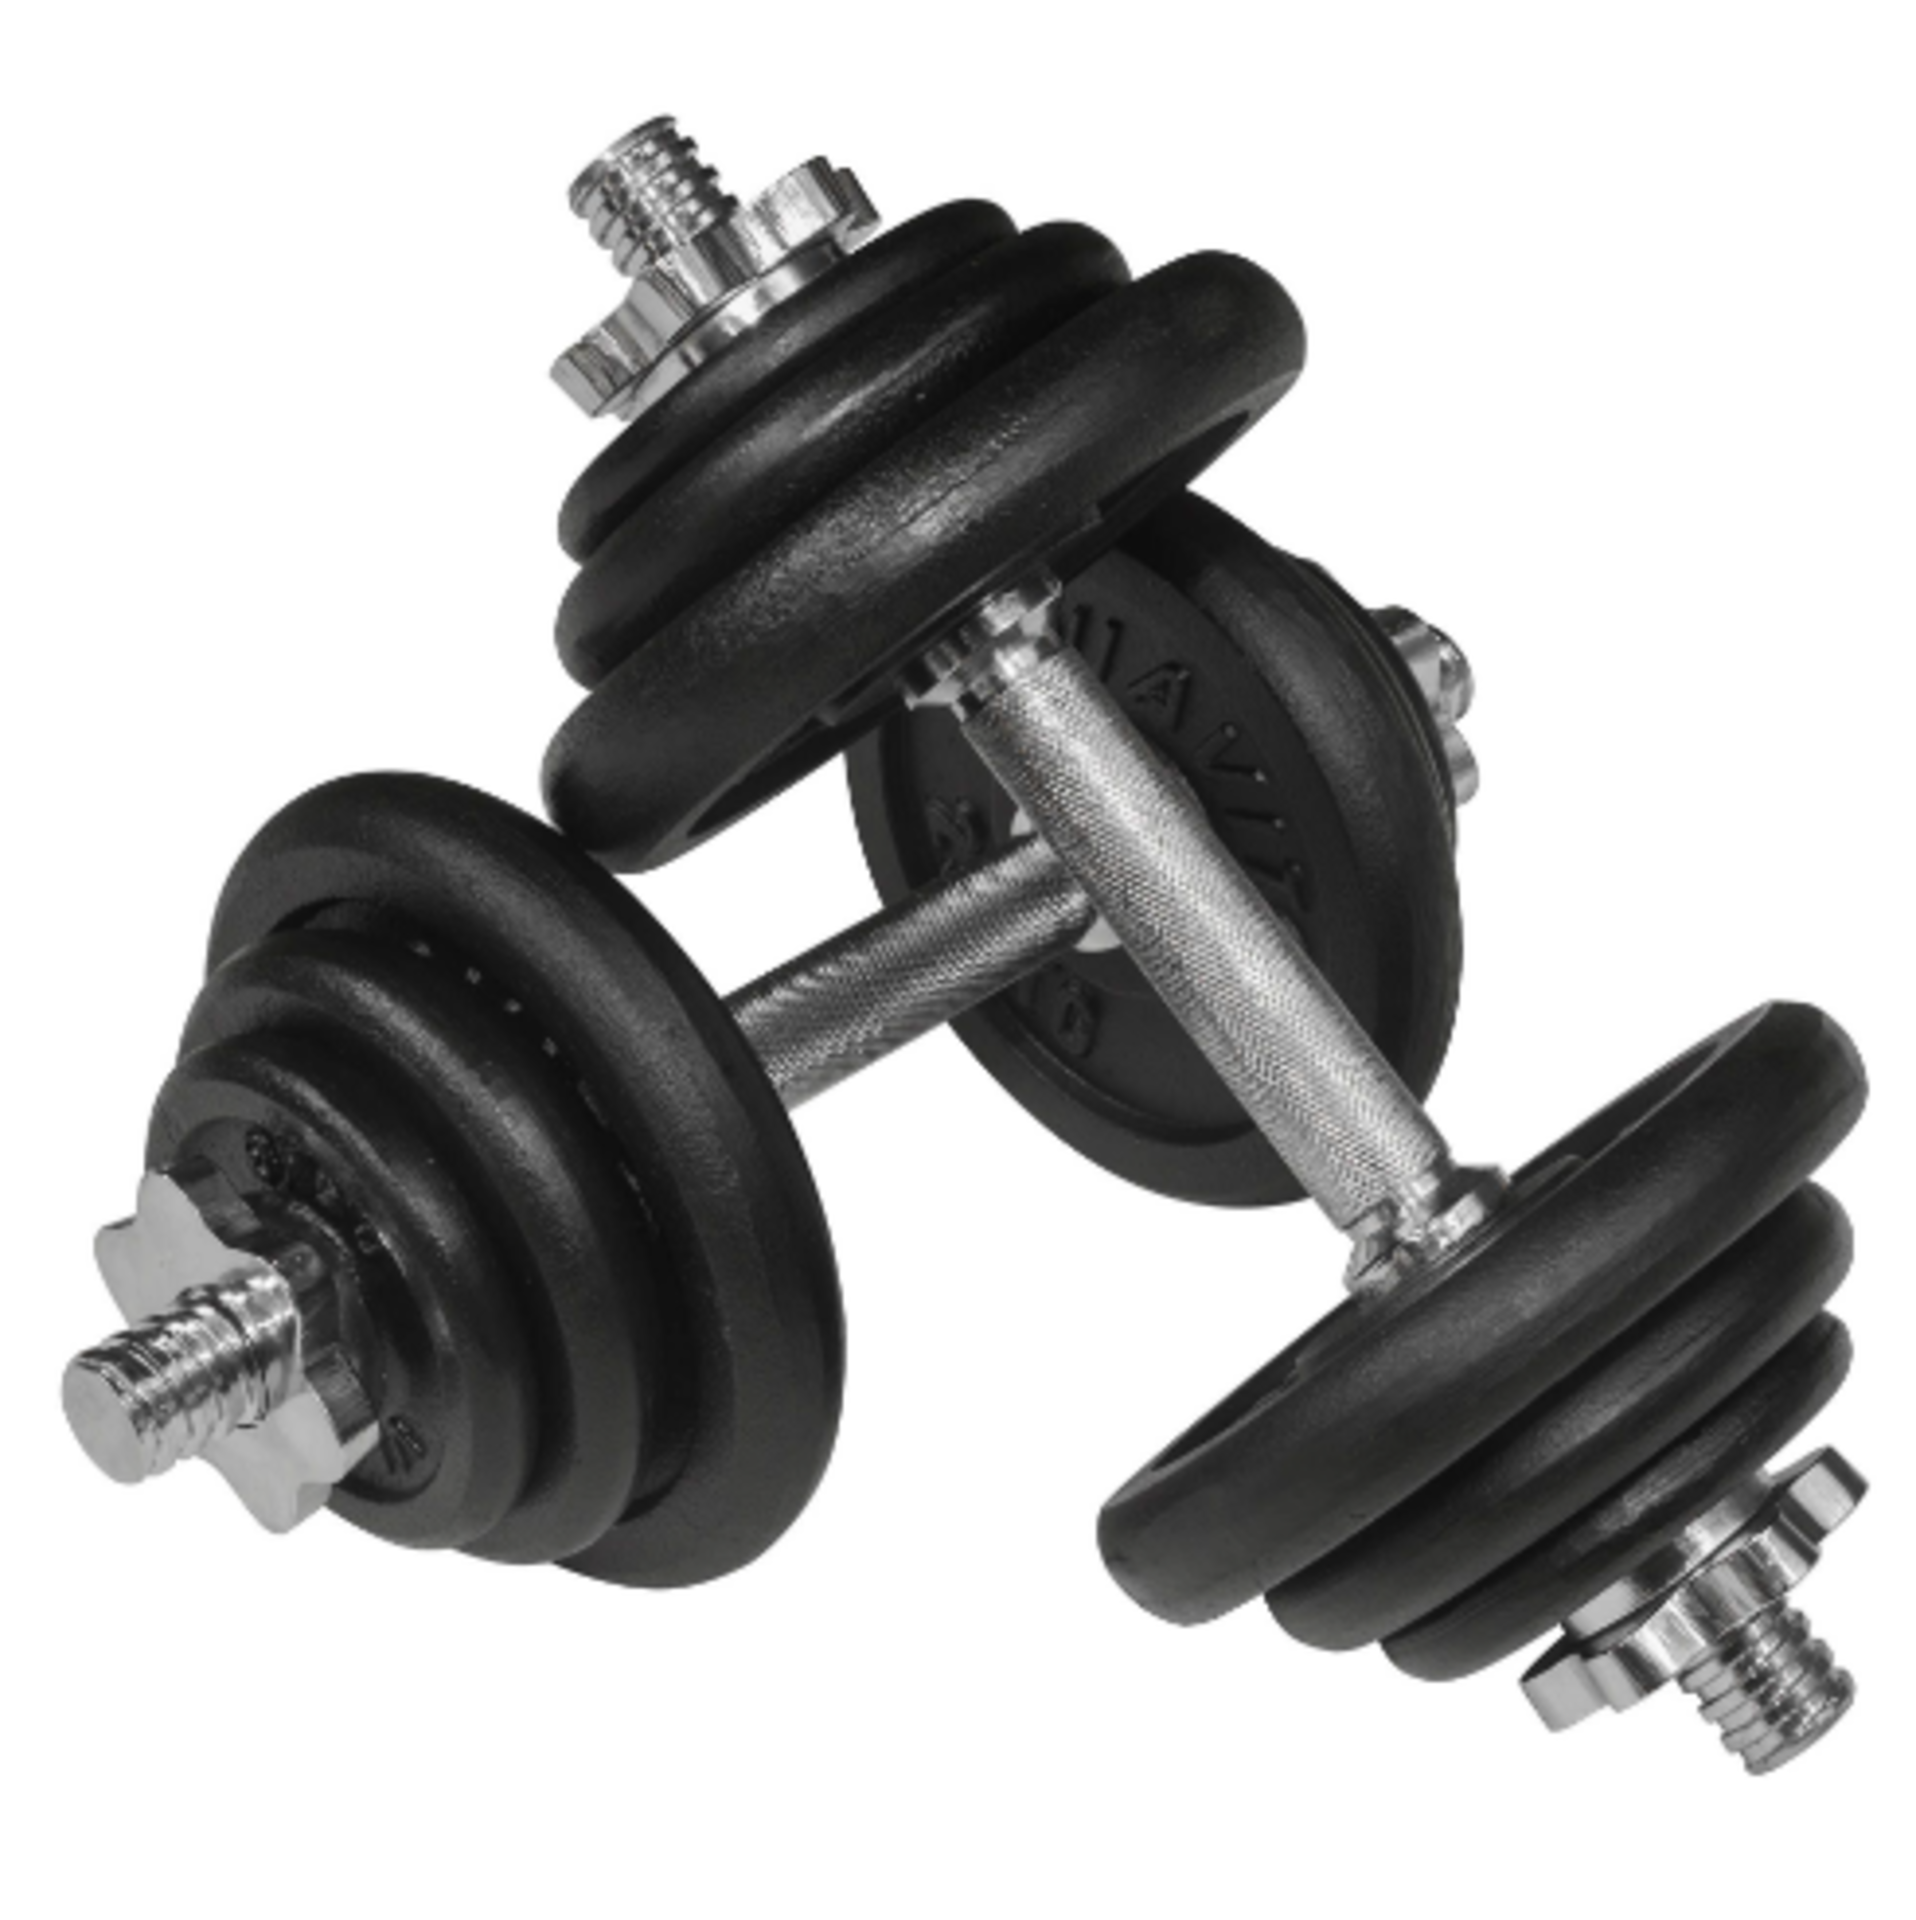 Viavito - Cast Iron Dumbbell Set 10KG - Unchecked & Boxed.